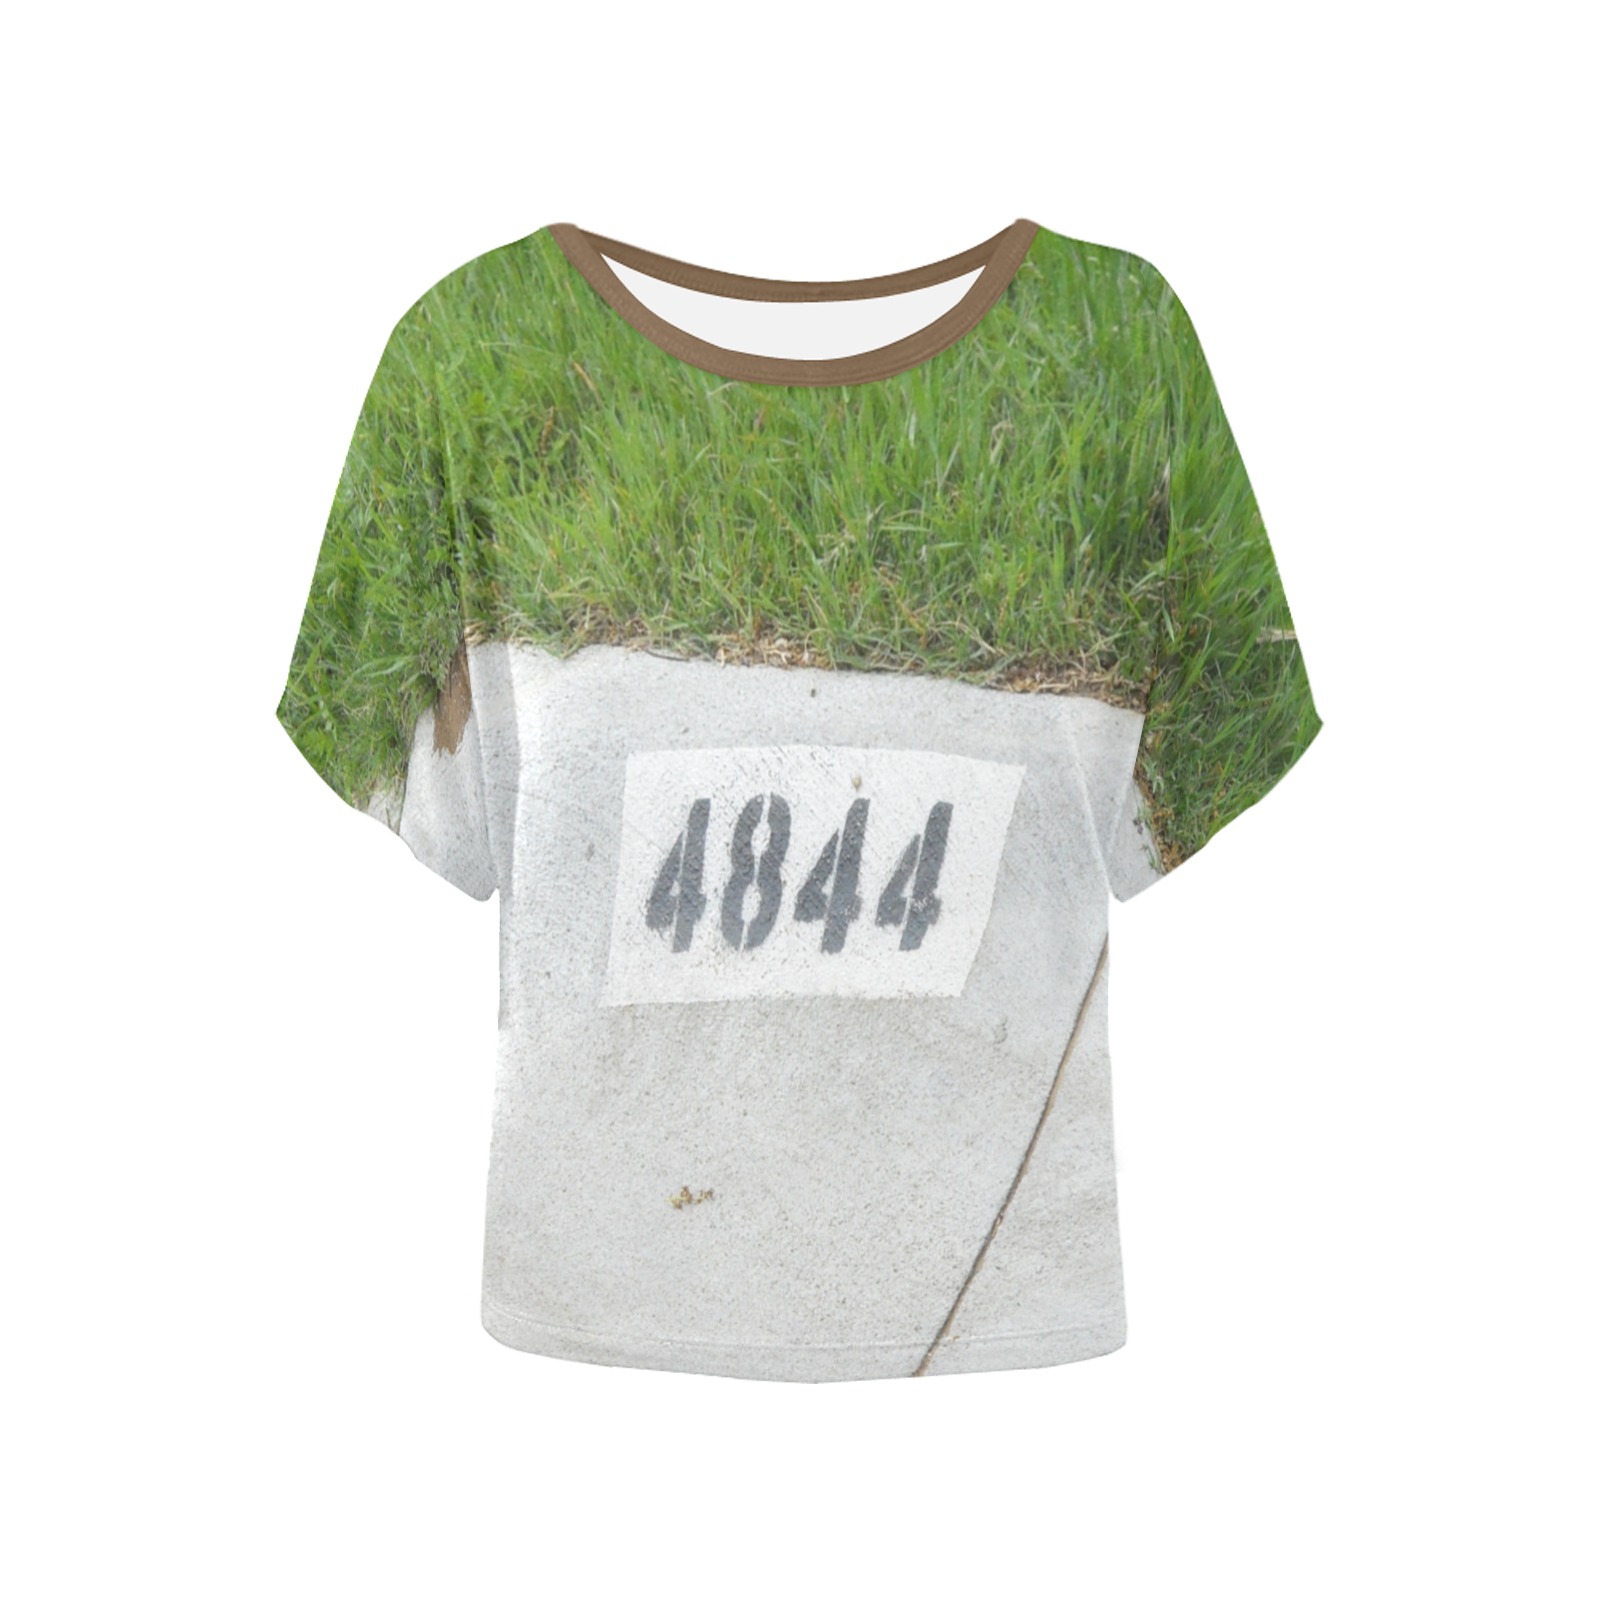 Street Number 4844 with brown collar Women's Batwing-Sleeved Blouse T shirt (Model T44)